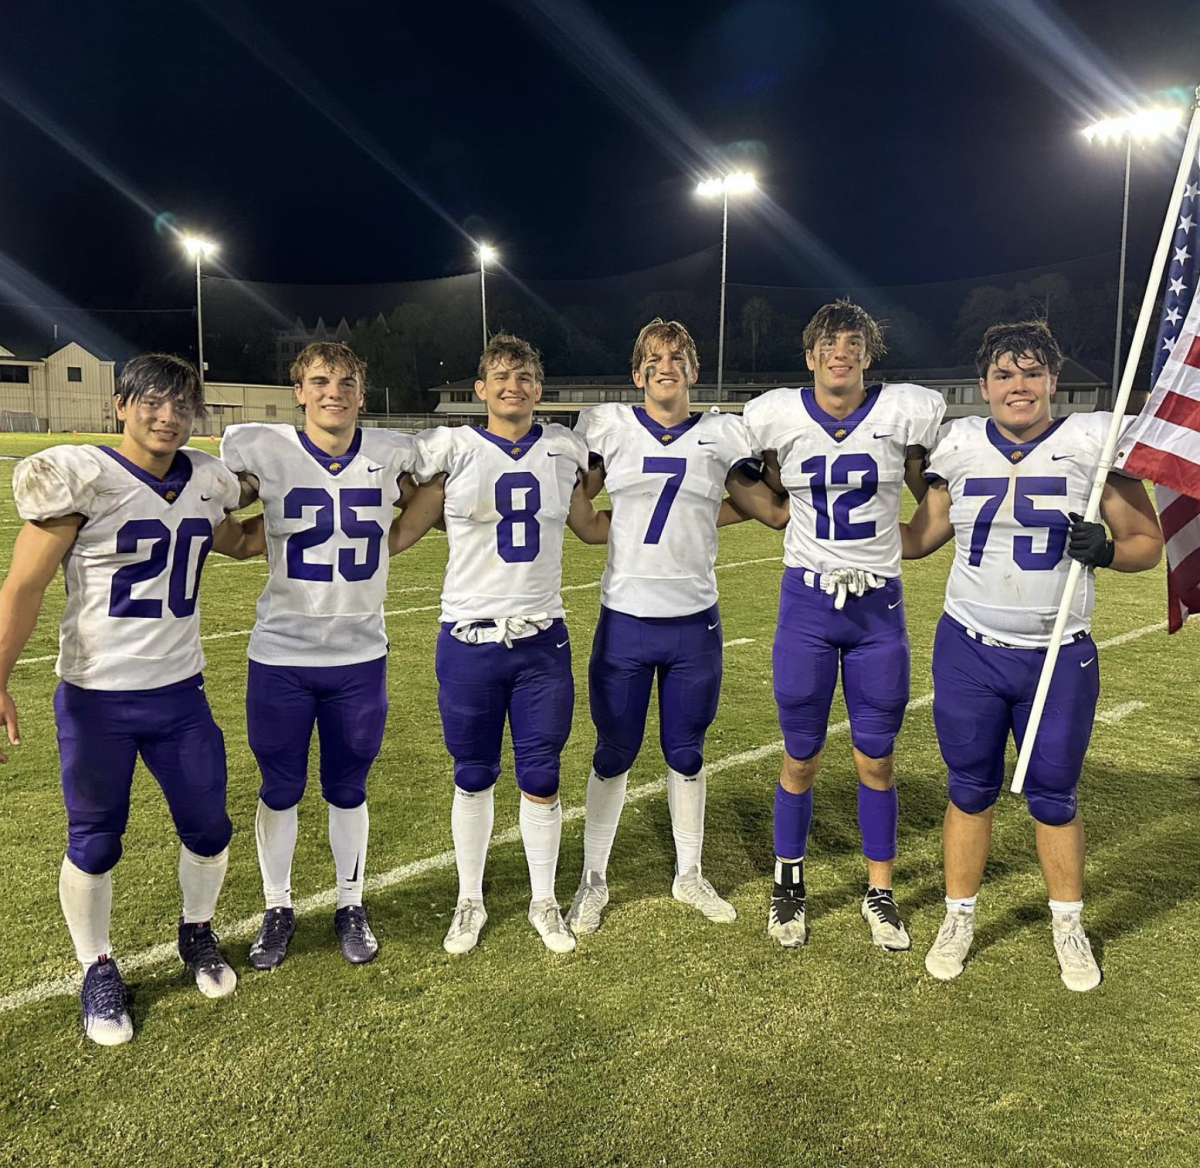 Varsity+football+players+pose+after+the+Battle+of+Whataburger+game.+From+L+to+R%3A+Miles+Roeder%2C+George+Kugle%2C+Boyd+Holcomb%2C+Read+Liuzzi%2C+Parker+Kubitza+and+Oliver+Eades.